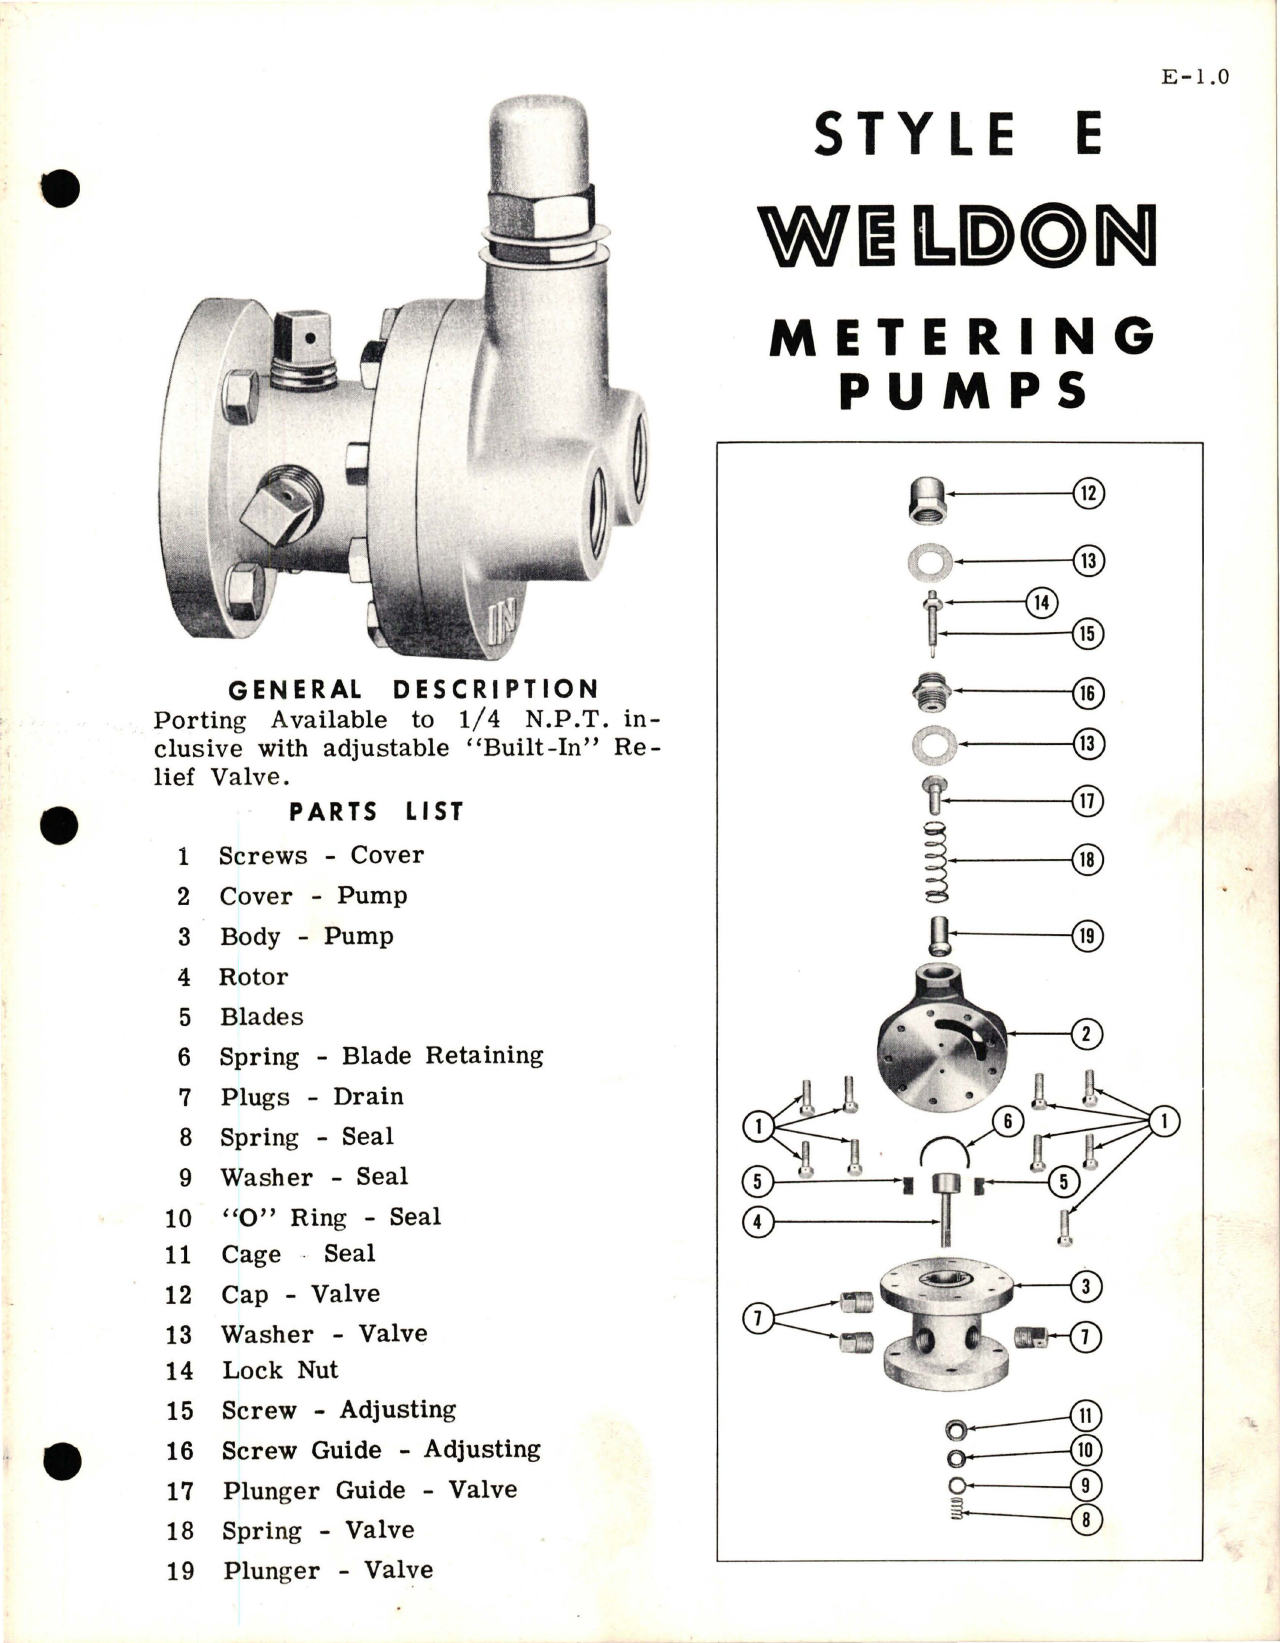 Sample page 5 from AirCorps Library document: Weldon Fluid Metering Pumps - Style E